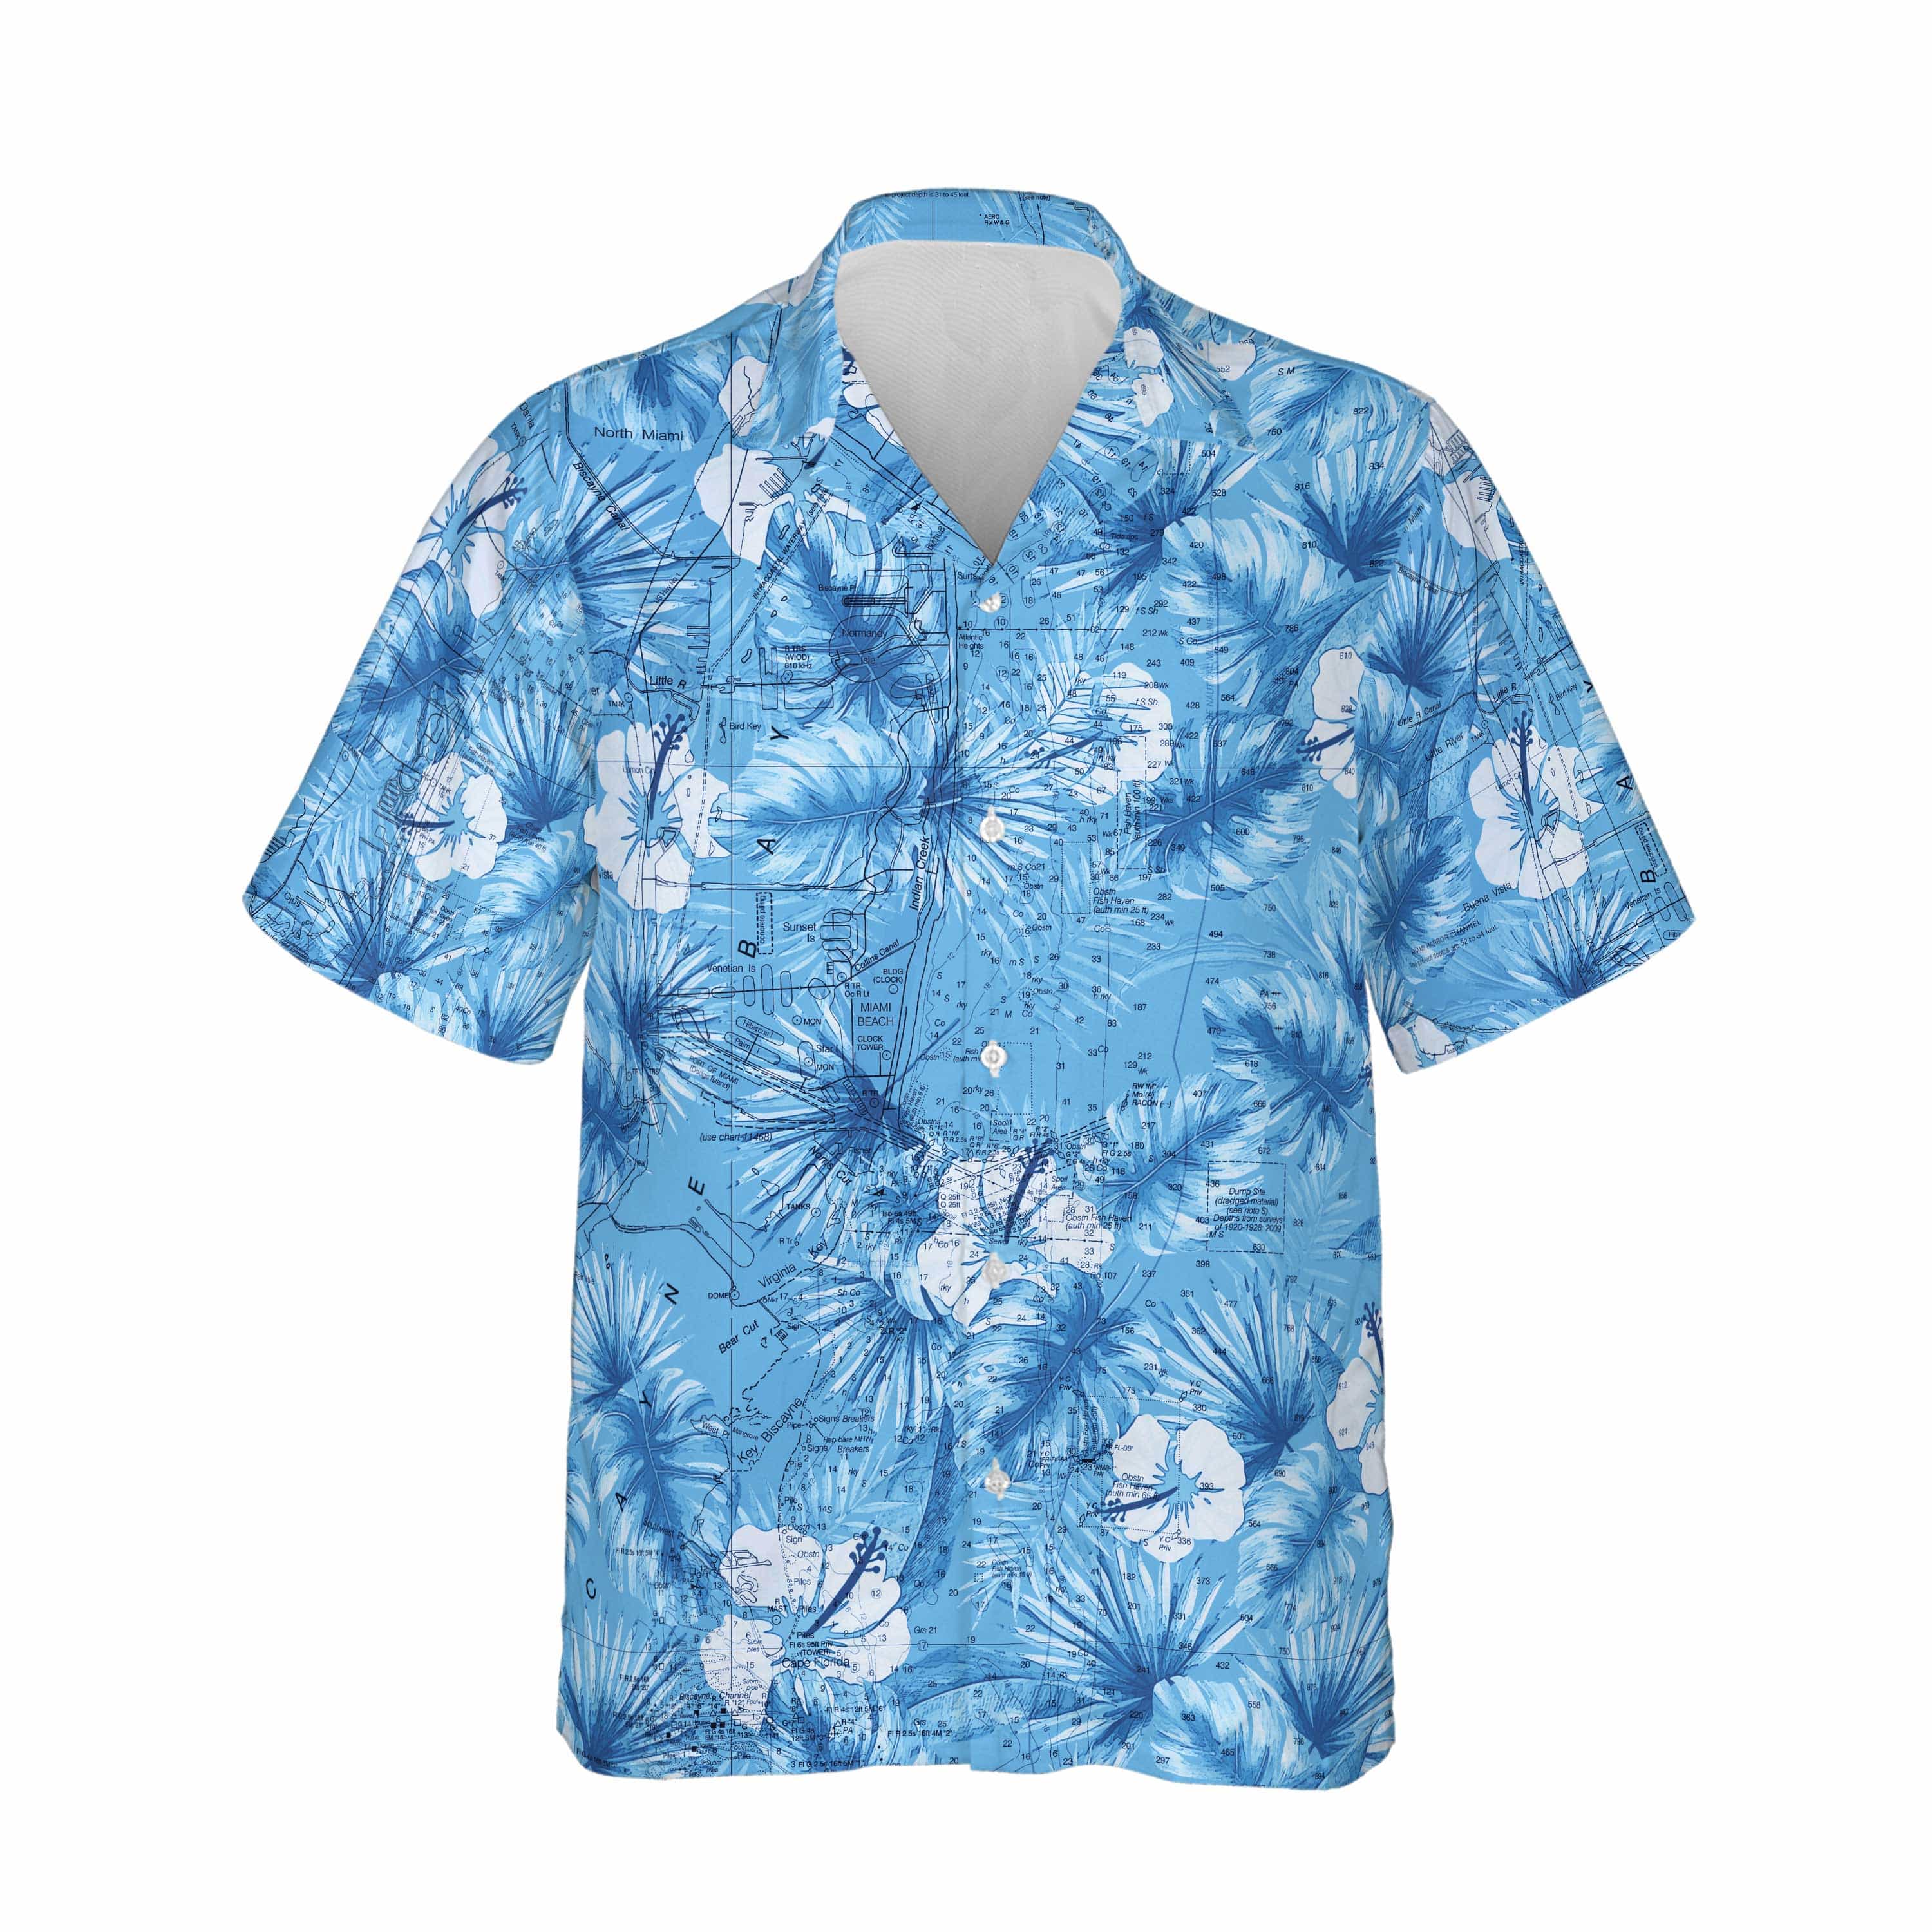 The Biscayne Bay Party Shirt